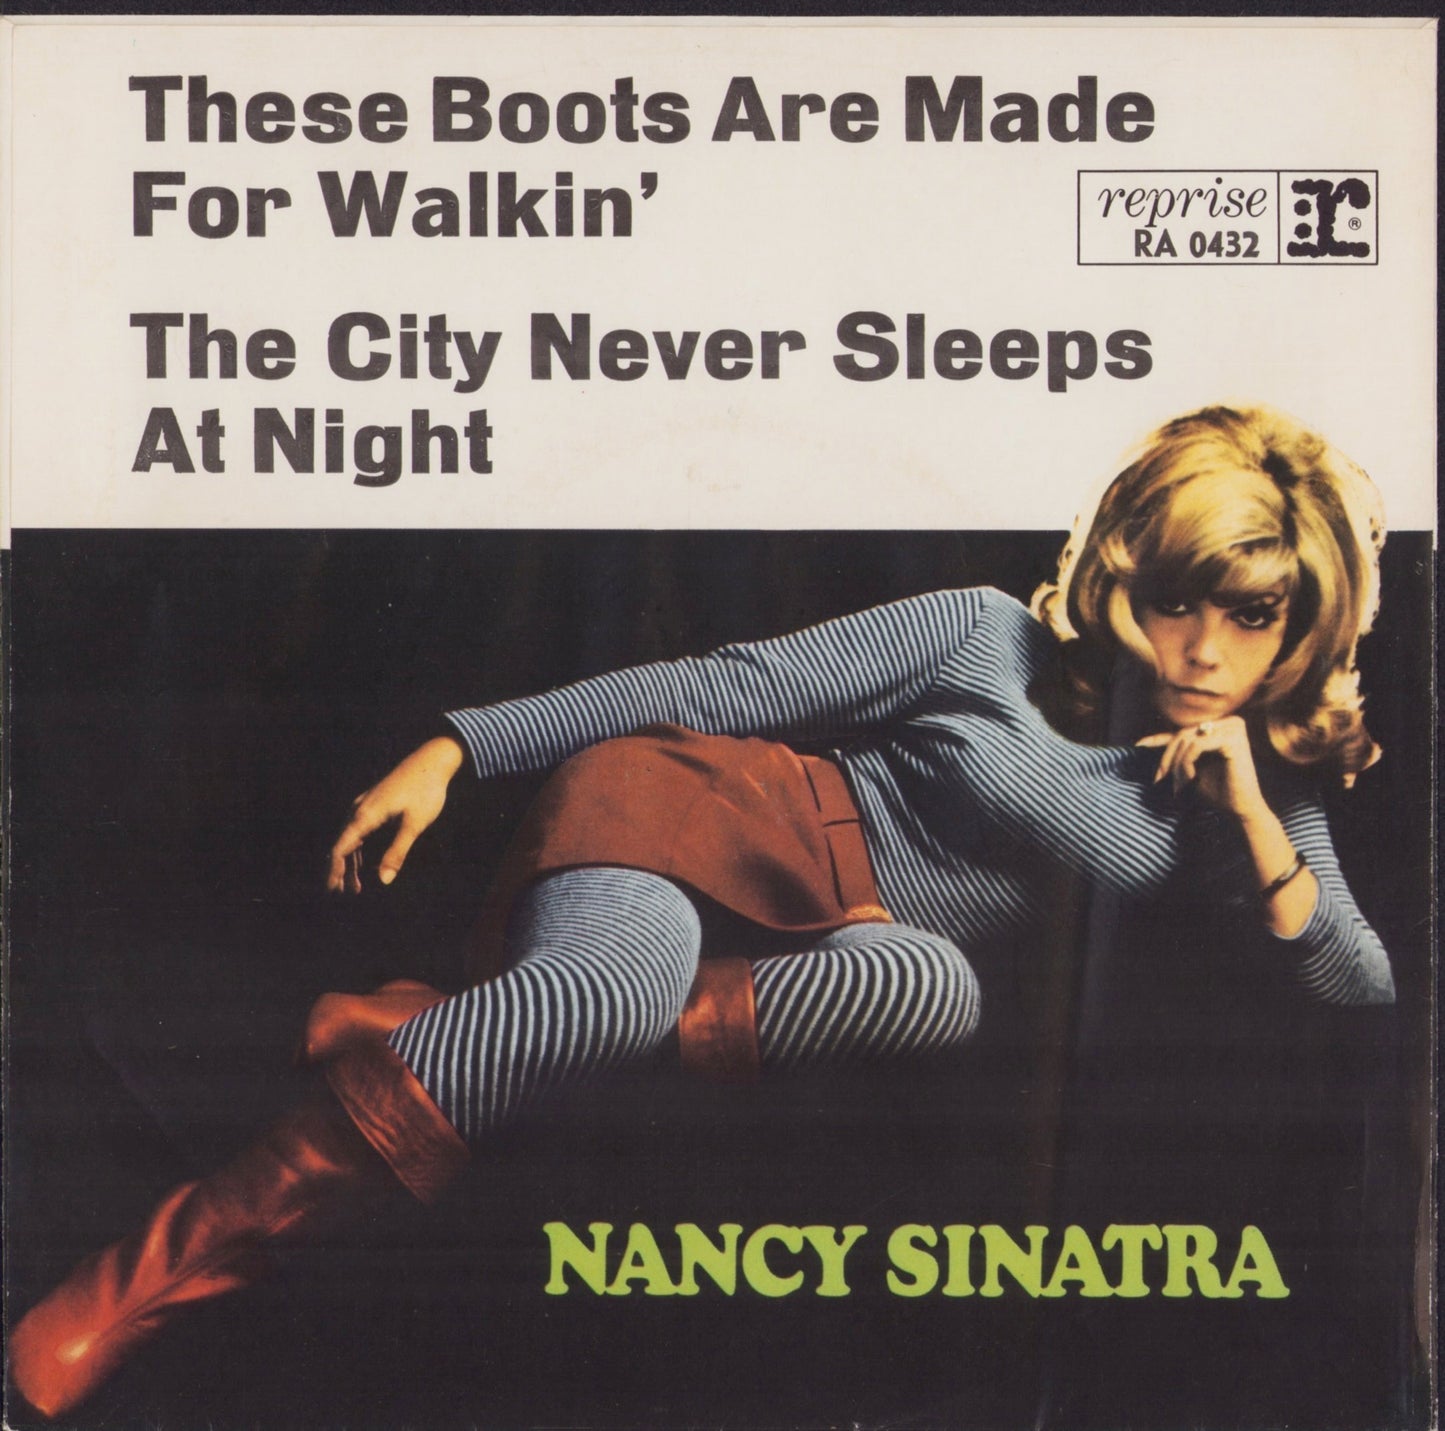 Nancy Sinatra ‎- These Boots Are Made For Walkin' / The City Never Sleeps At Night Vinyl 7"